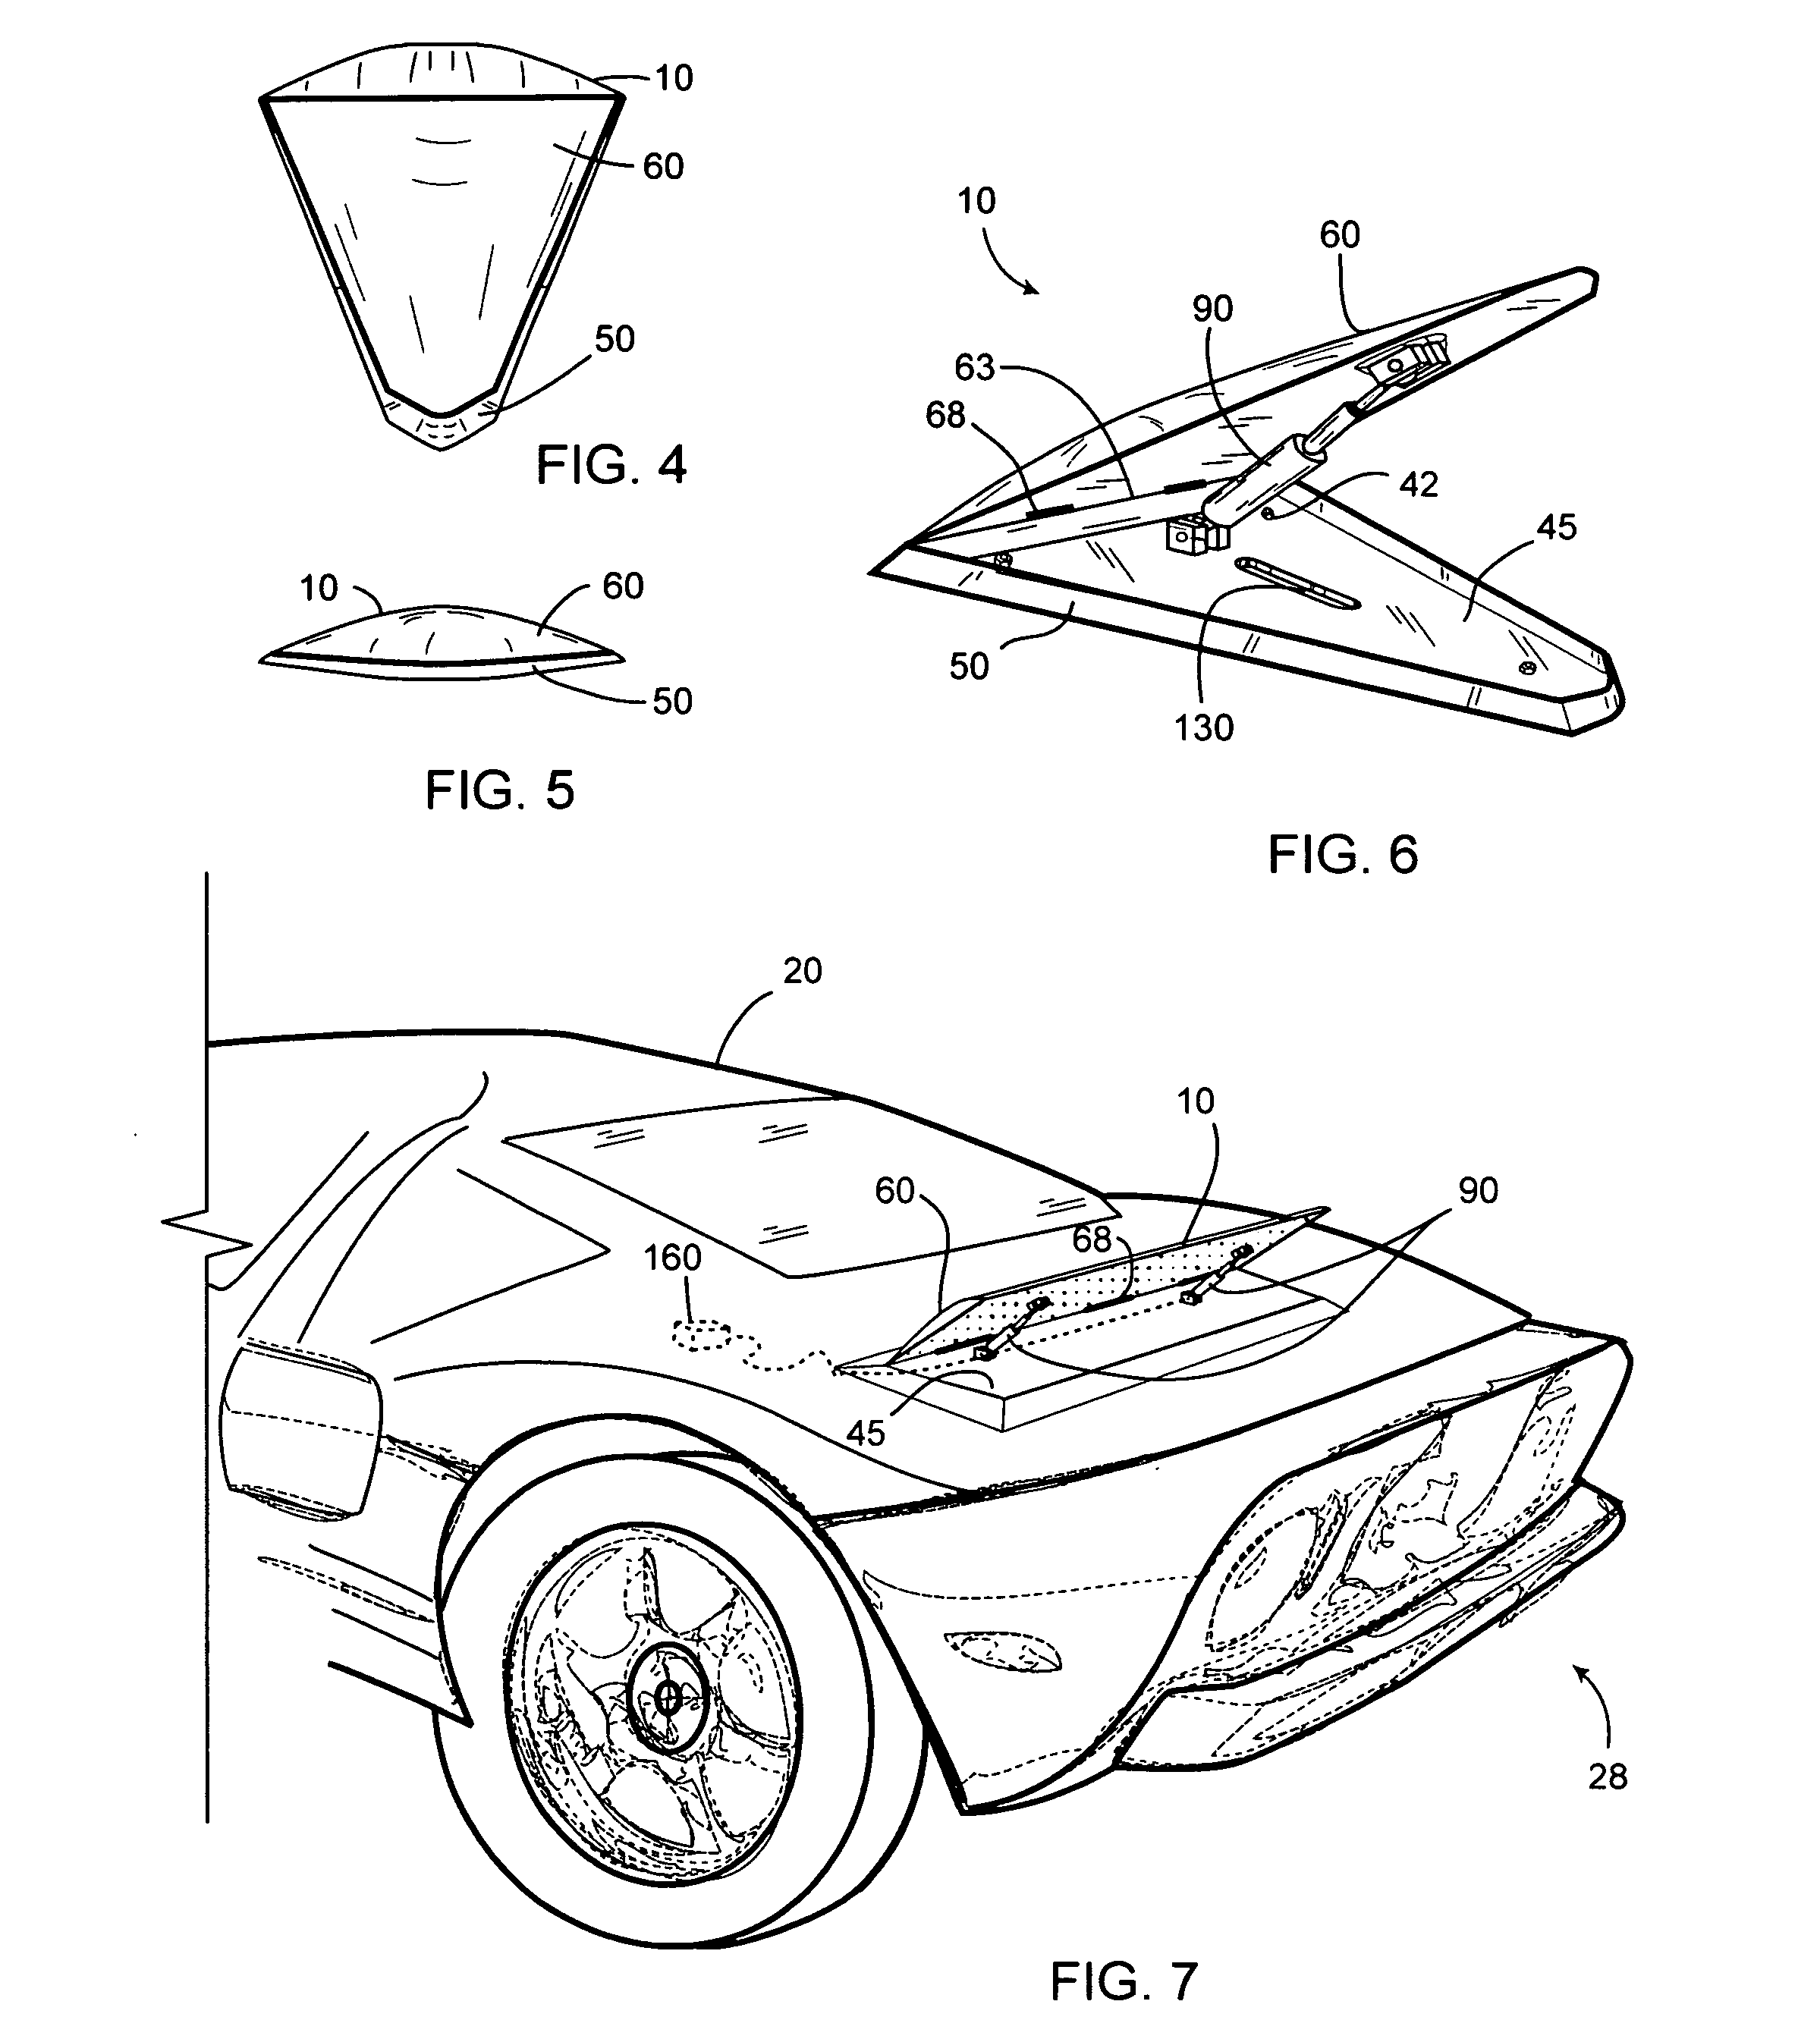 Self-contained adjustable air foil and method